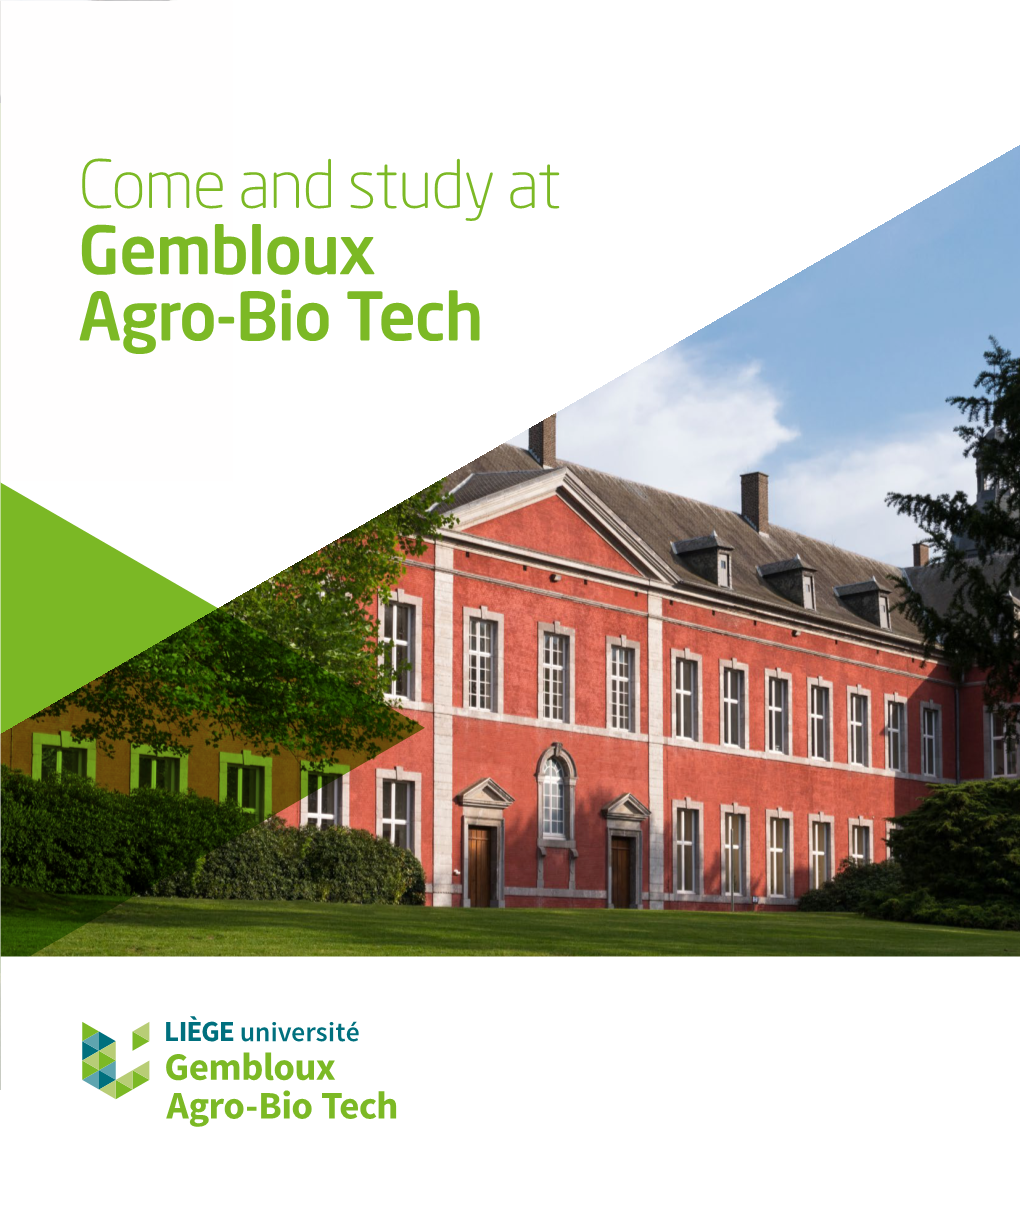 Come and Study at Gembloux Agro-Bio Tech